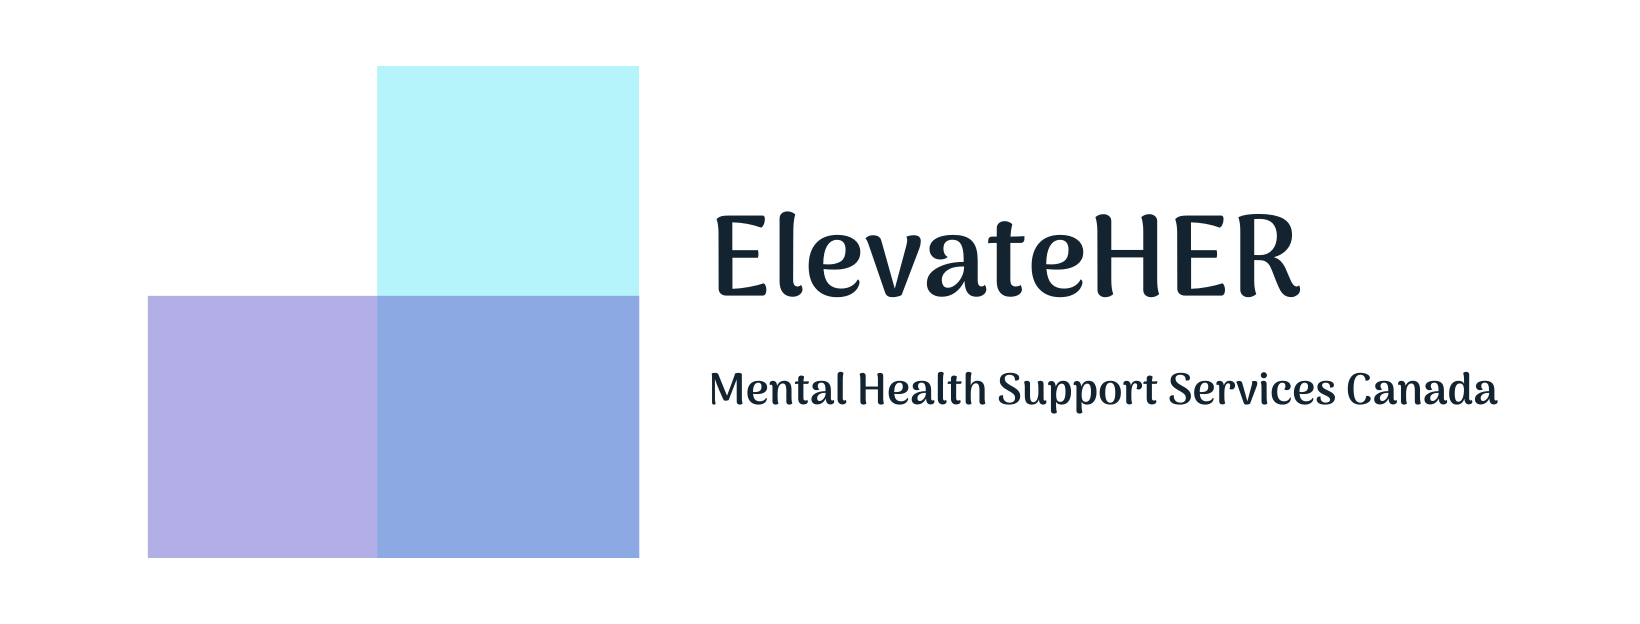 ElevateHER Mental Health Support Services Canada logo